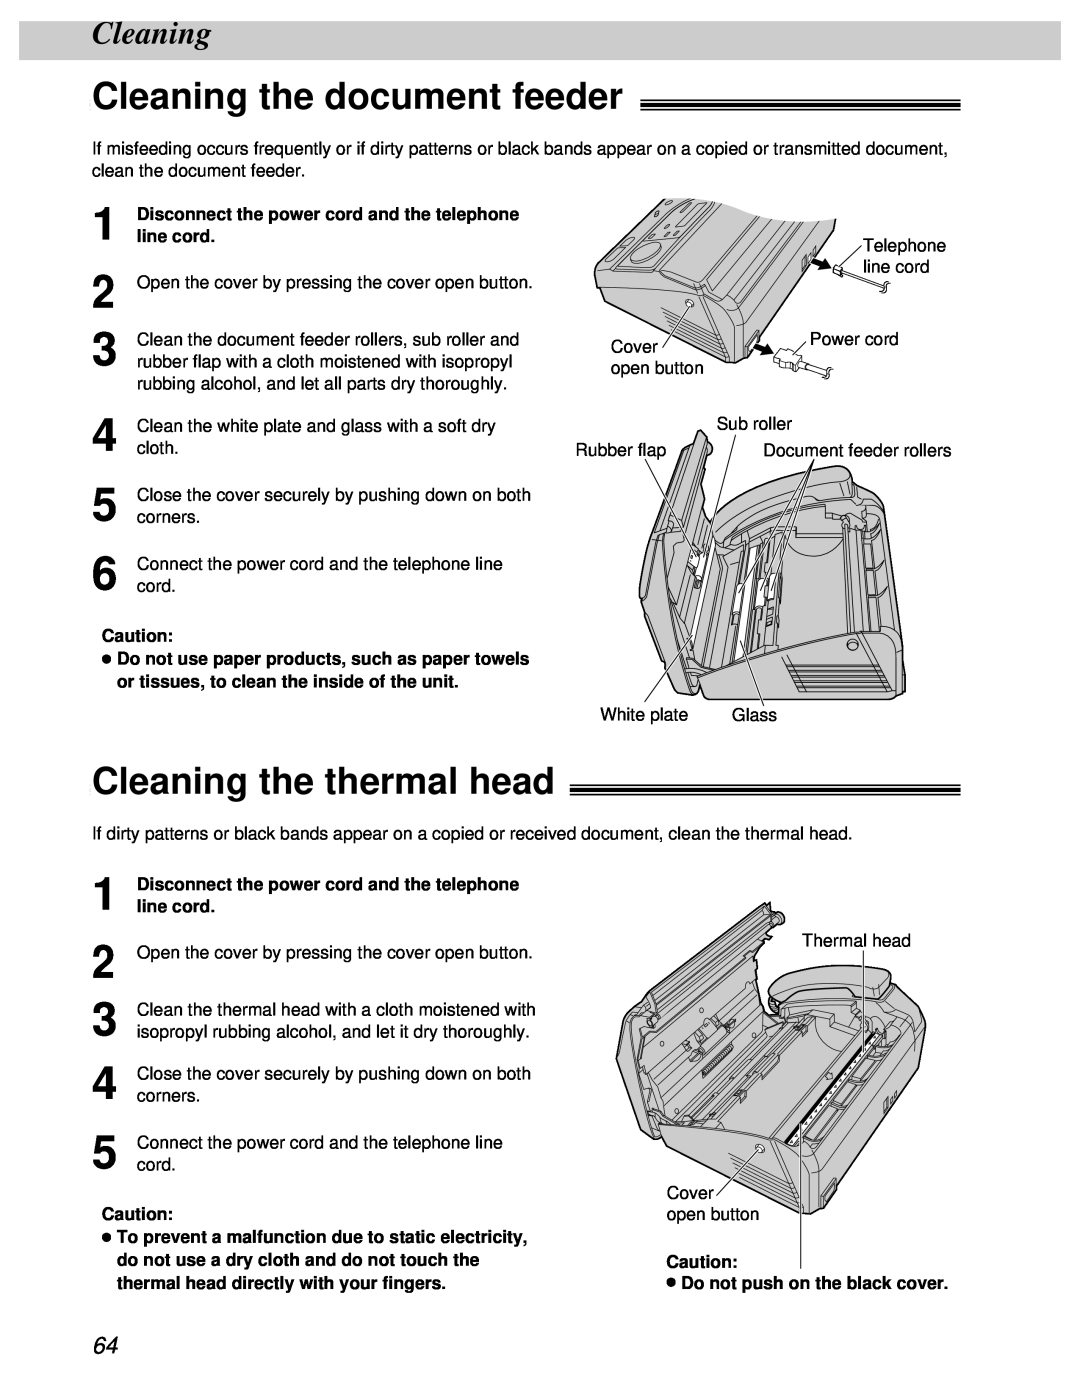 Panasonic KX-FT31BX quick start Cleaning the document feeder, Cleaning the thermal head 